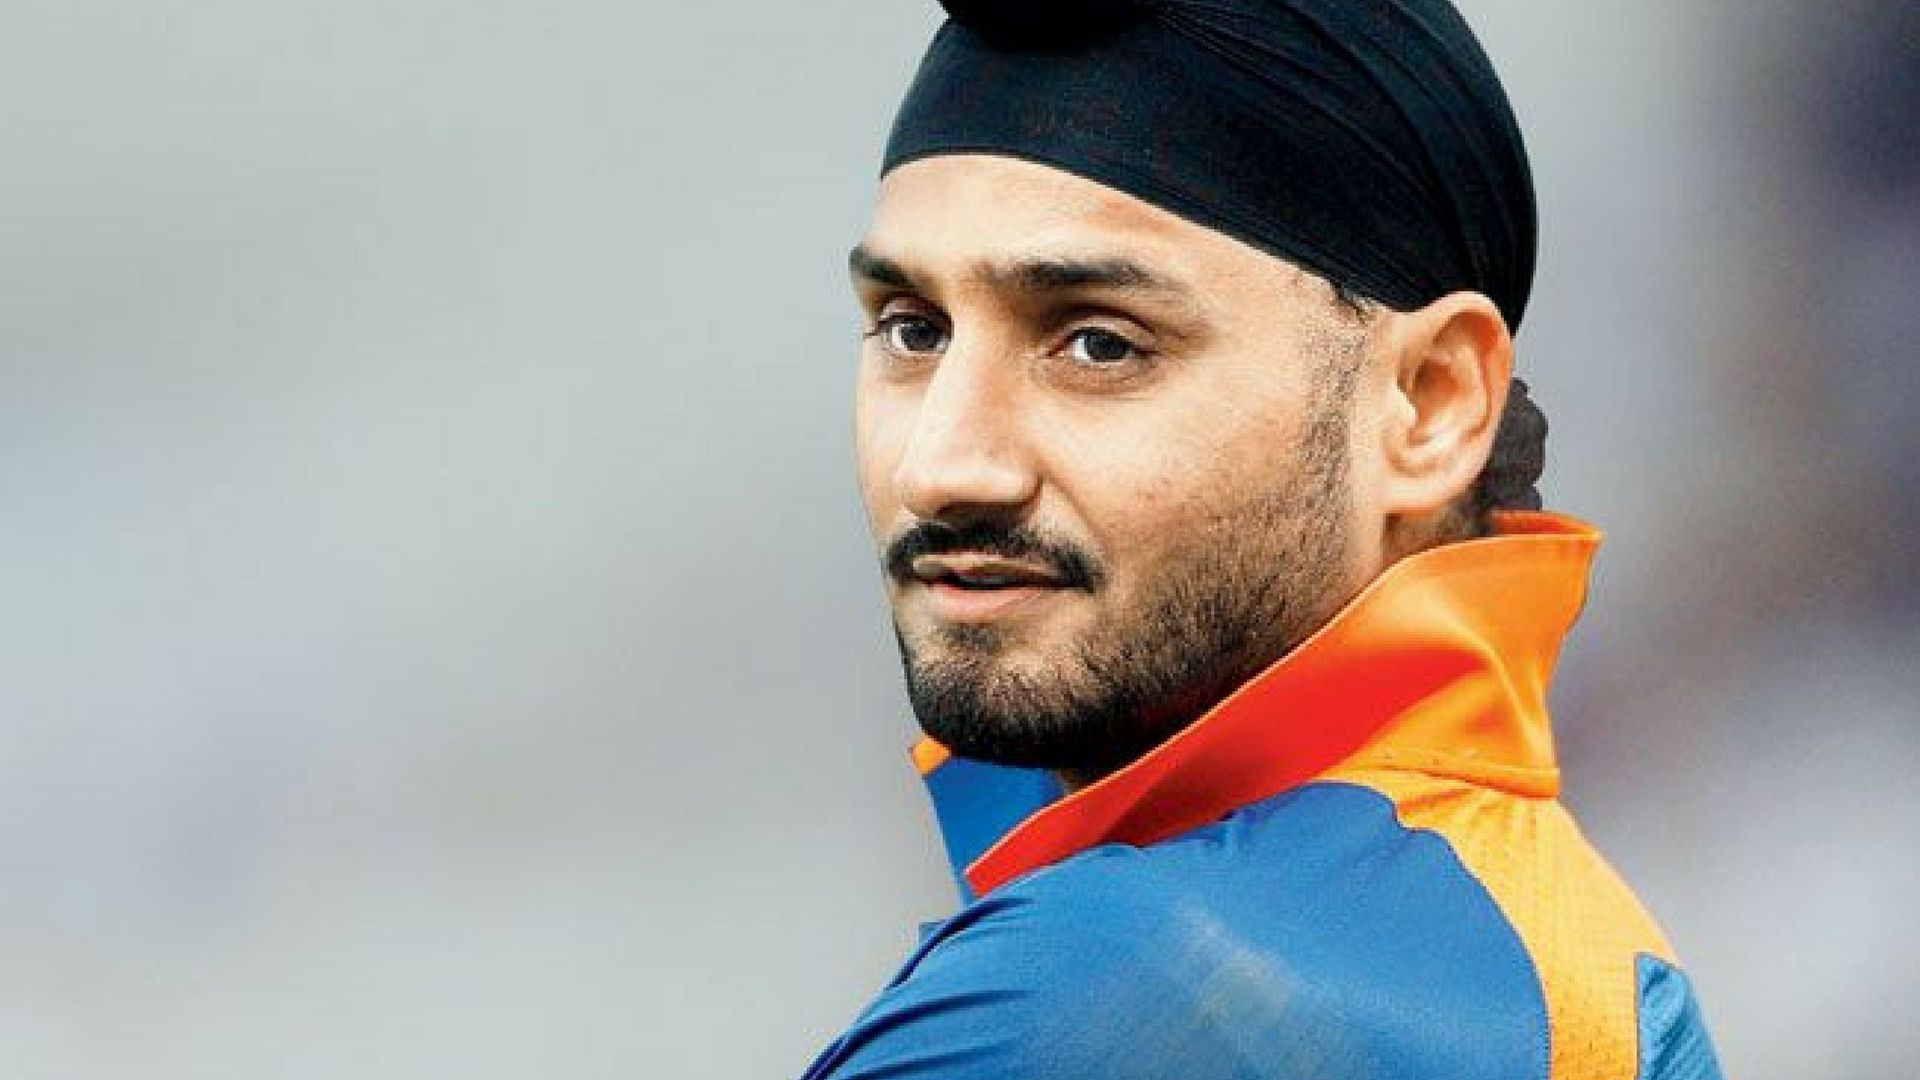 Harbhajan Singh Get's Lectured About His Own Beliefs On Twitter